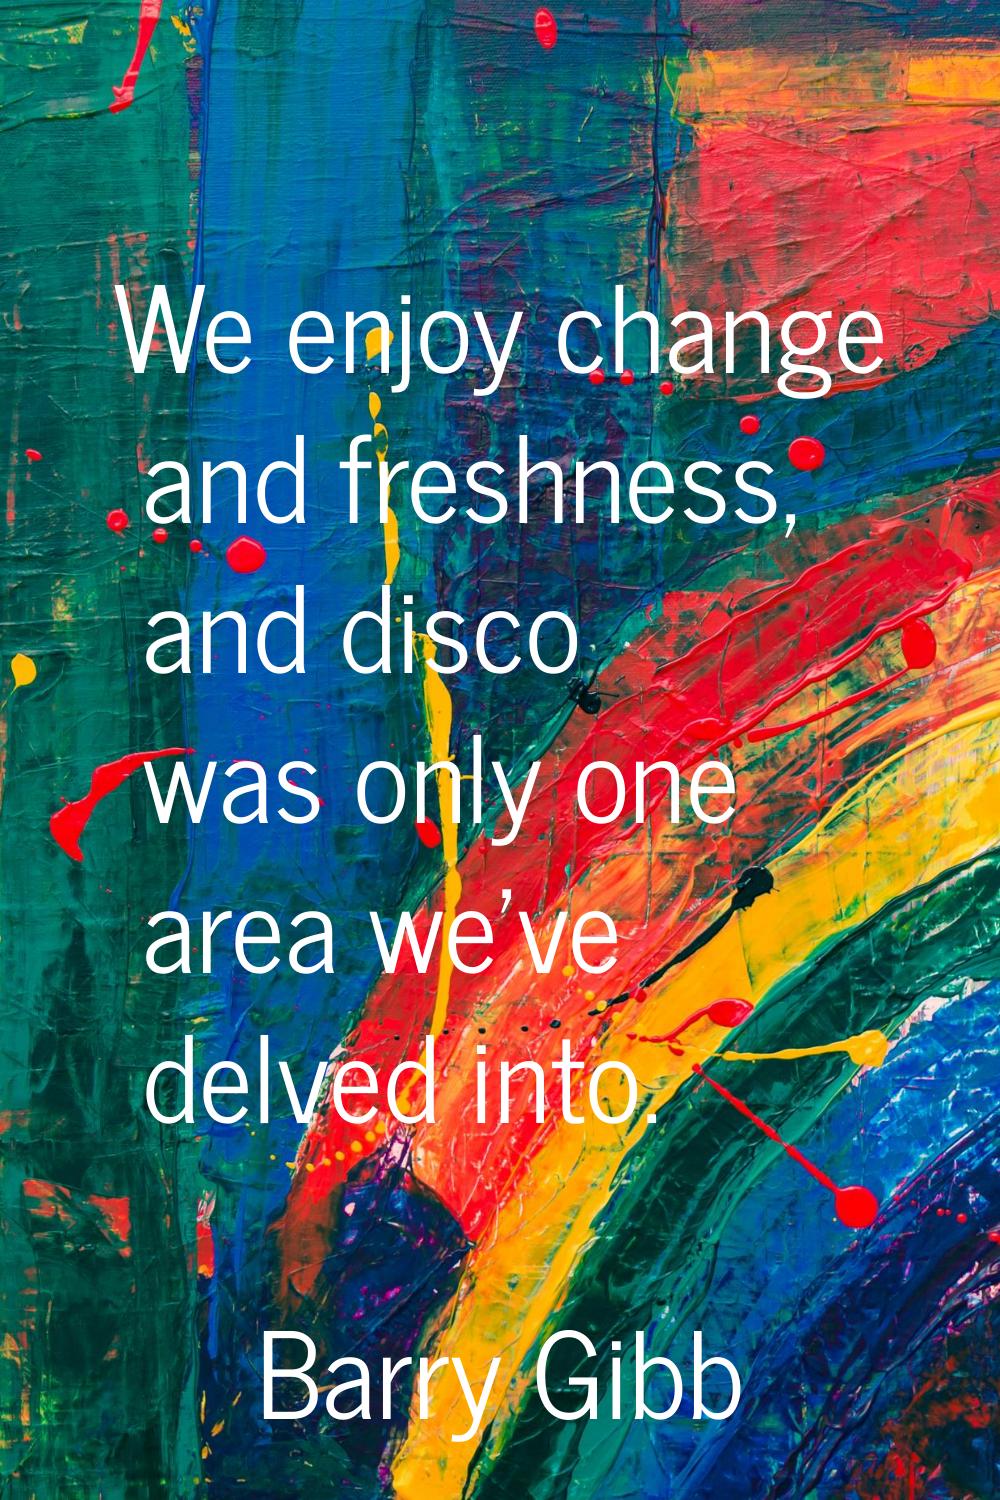 We enjoy change and freshness, and disco was only one area we've delved into.